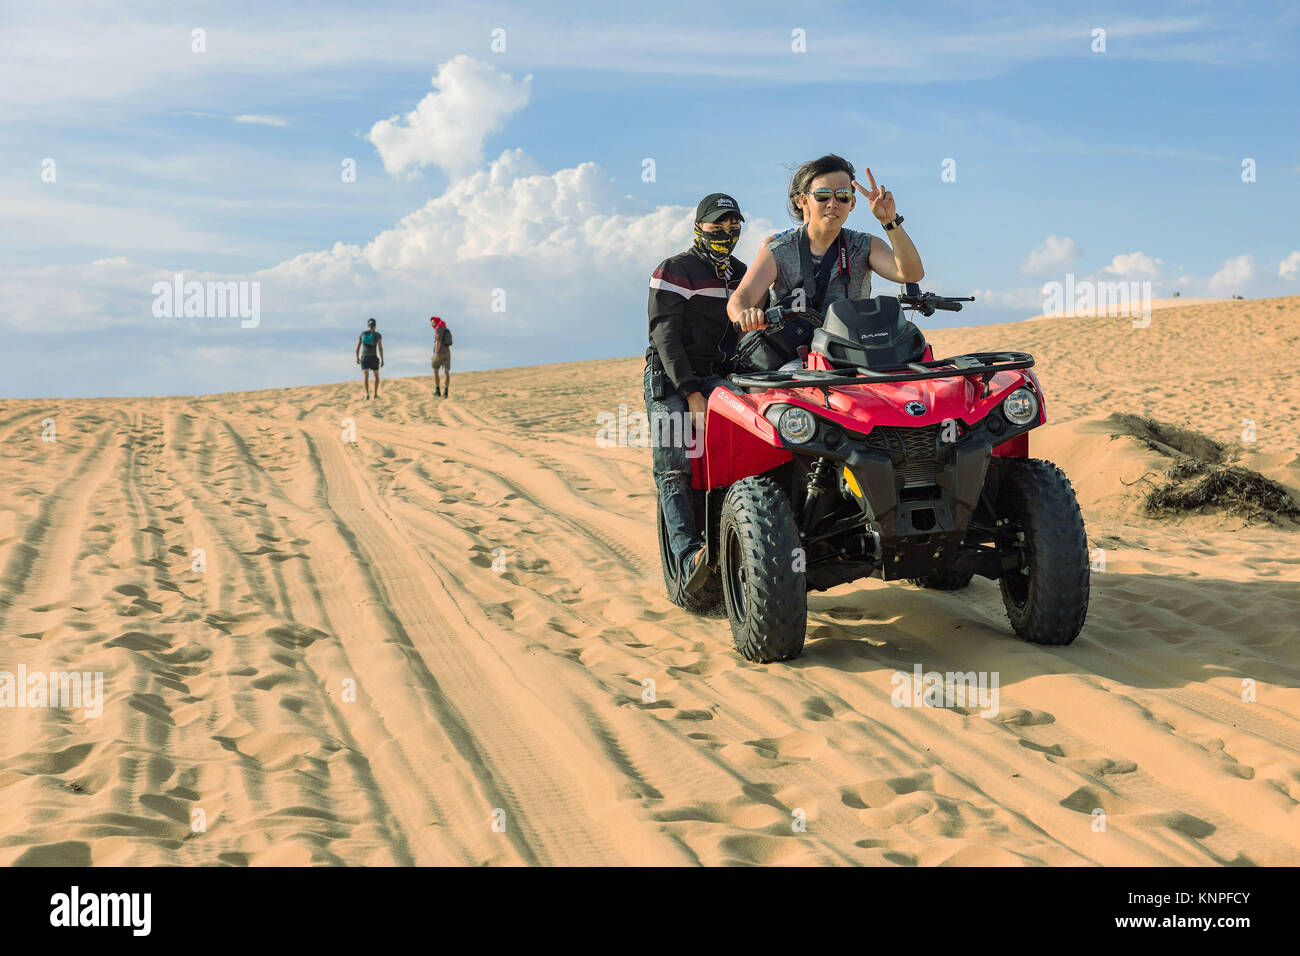 MUI NE, VIETNAM - MARCH 24, 2017. A young man with a cap on his head runs off road on sand dunes.. Off road car vehicle in white sand dune desert at M Stock Photo